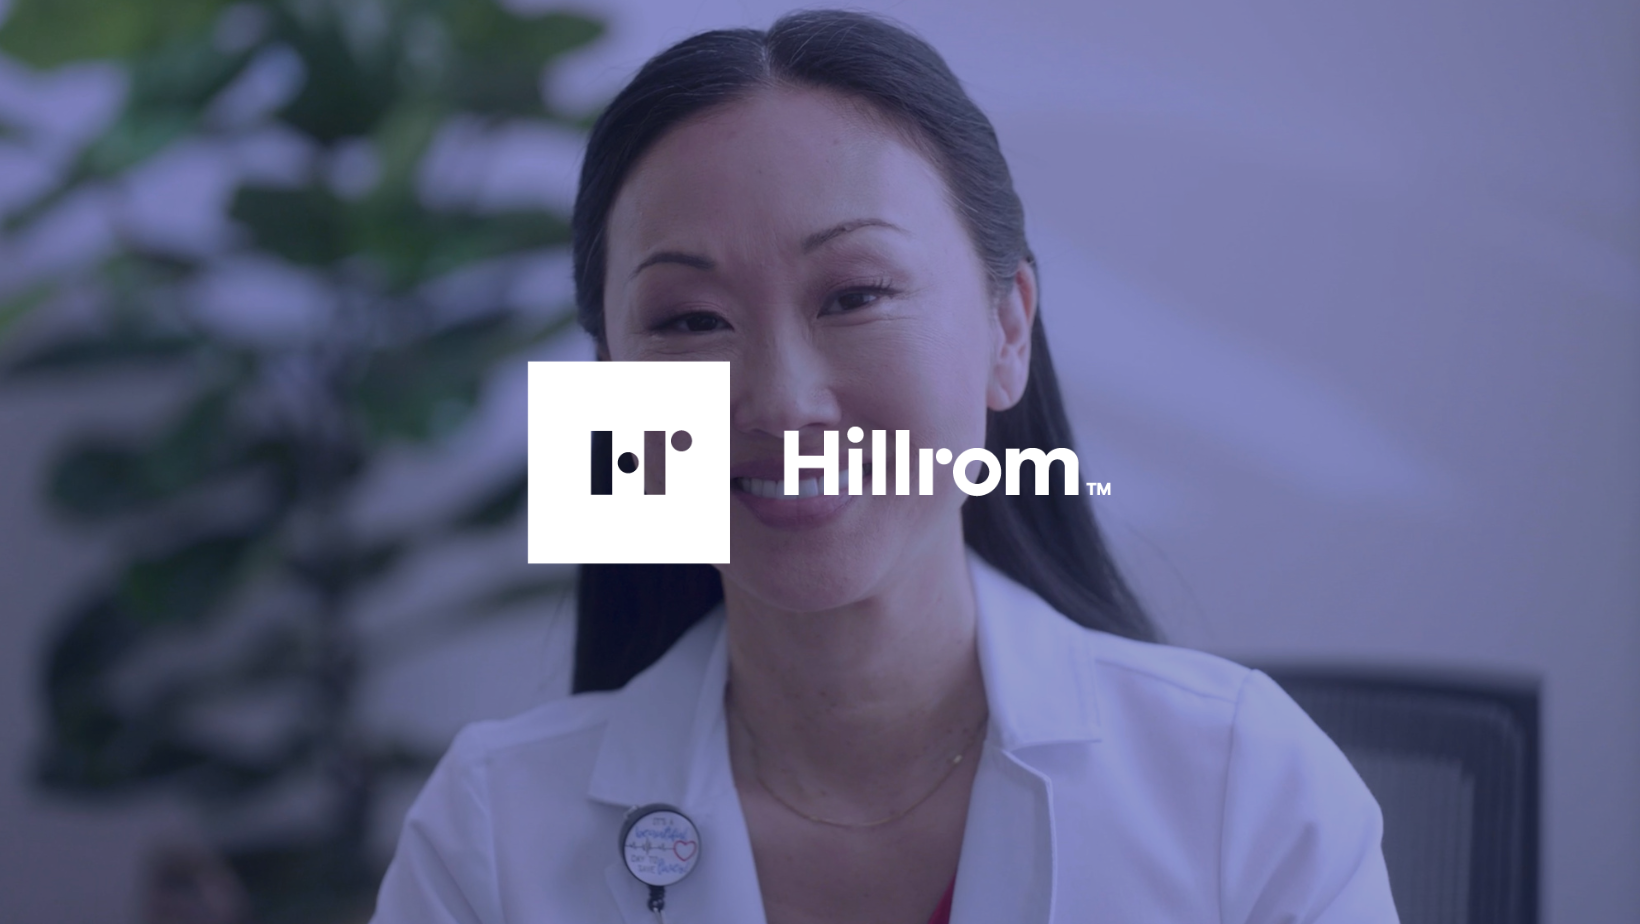 A woman wearing a white lab coat with an over lay of 'Hillrom'.